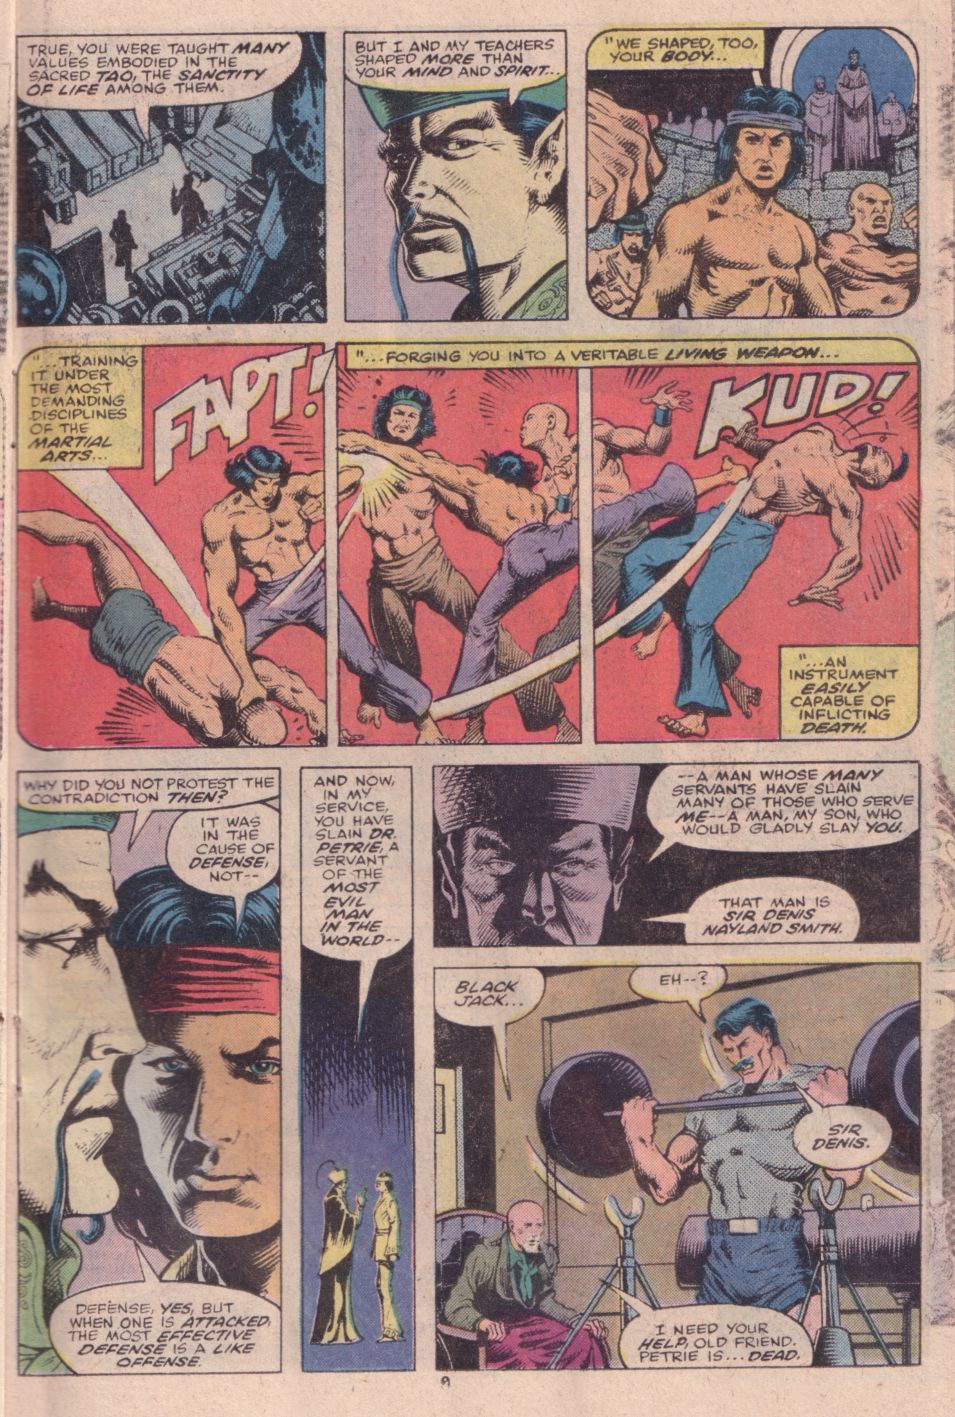 What If? (1977) Issue #16 - Shang Chi Master of Kung Fu fought on The side of Fu Manchu #16 - English 8